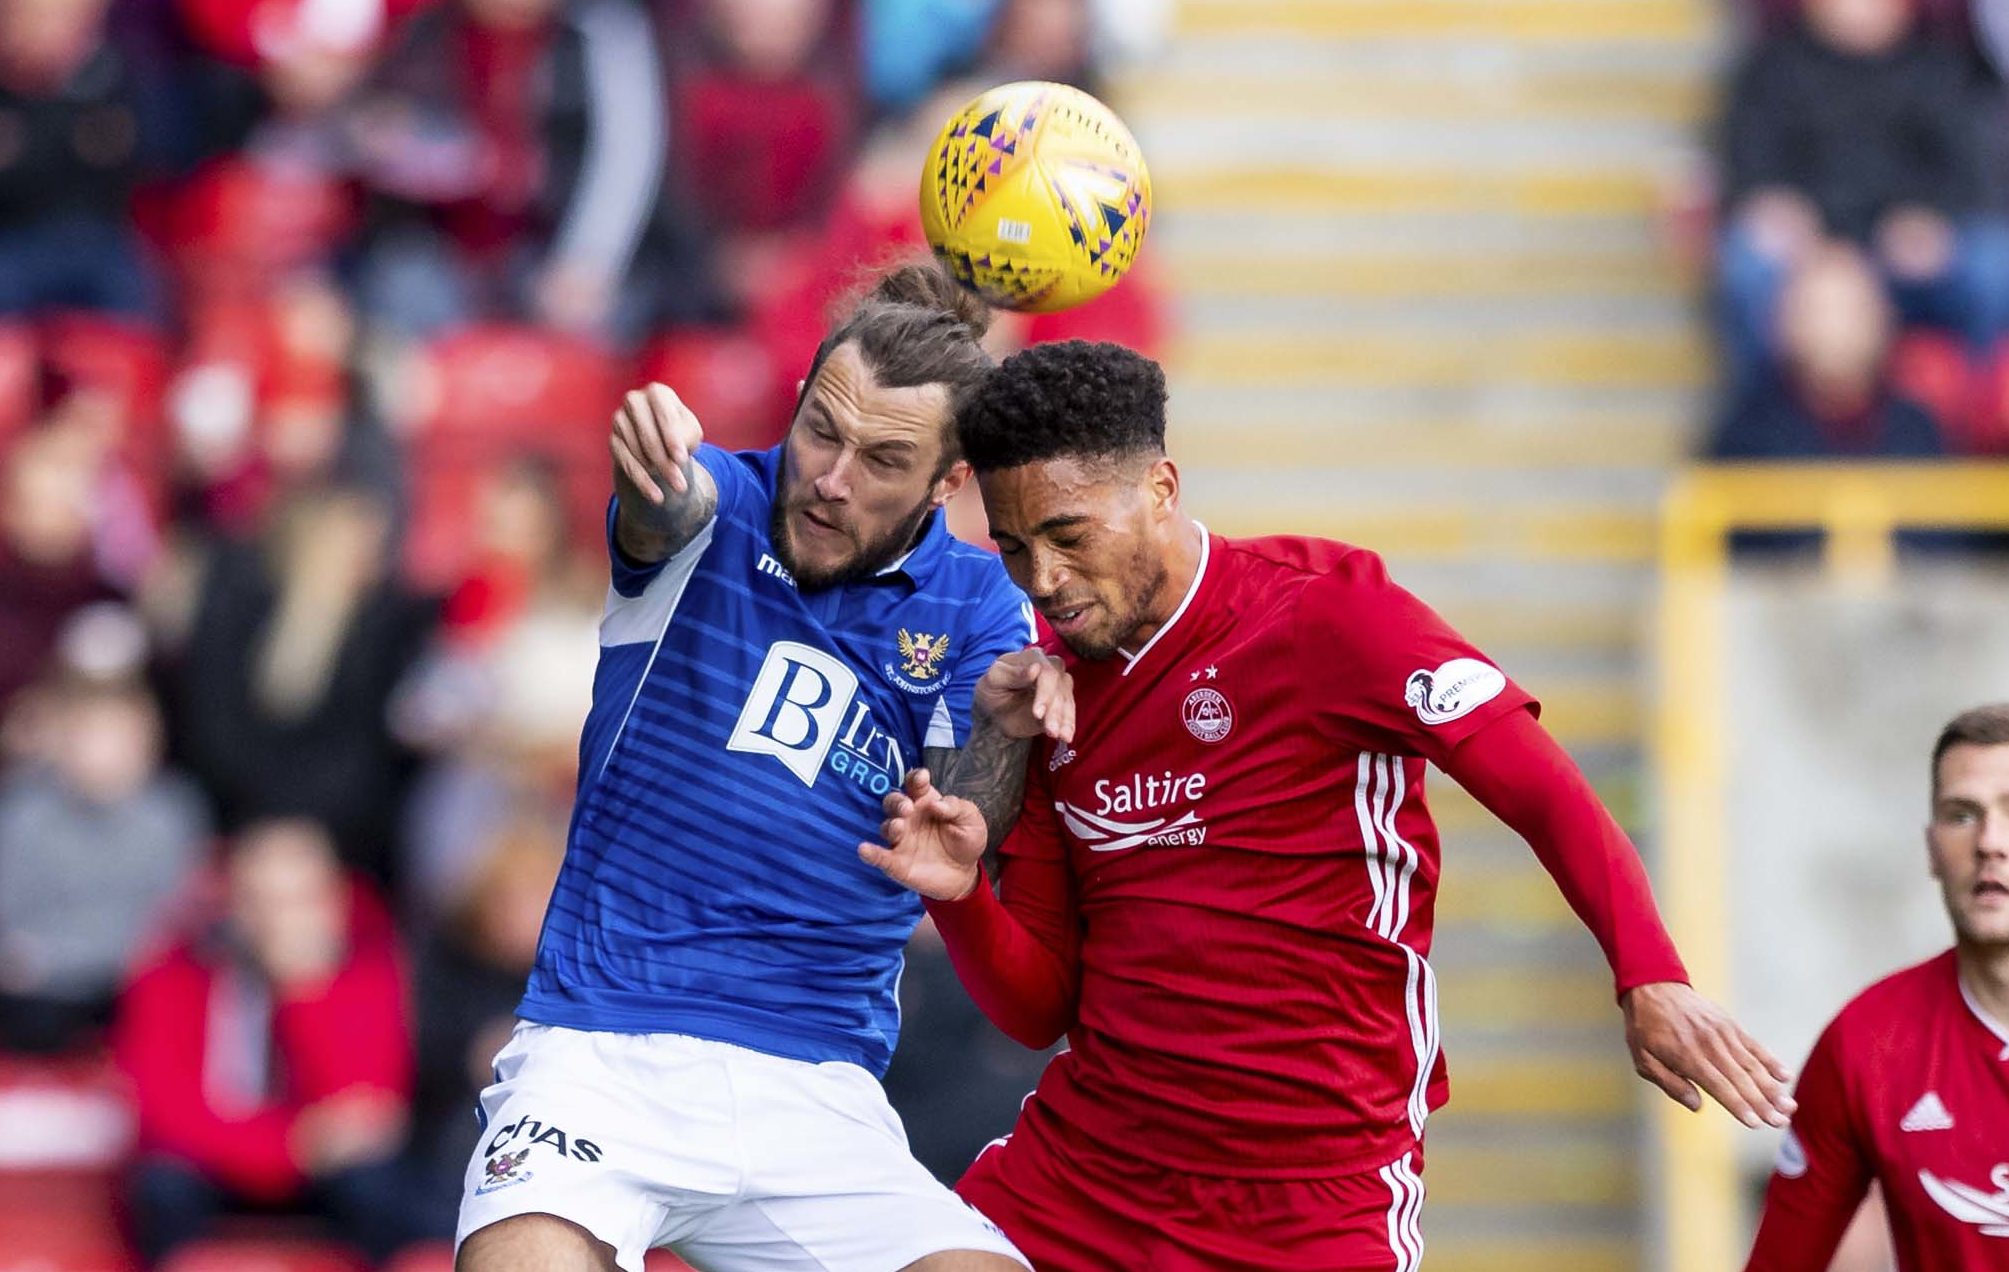 Stevie May battles for the ball with Abrdeen player Zak Vyner.